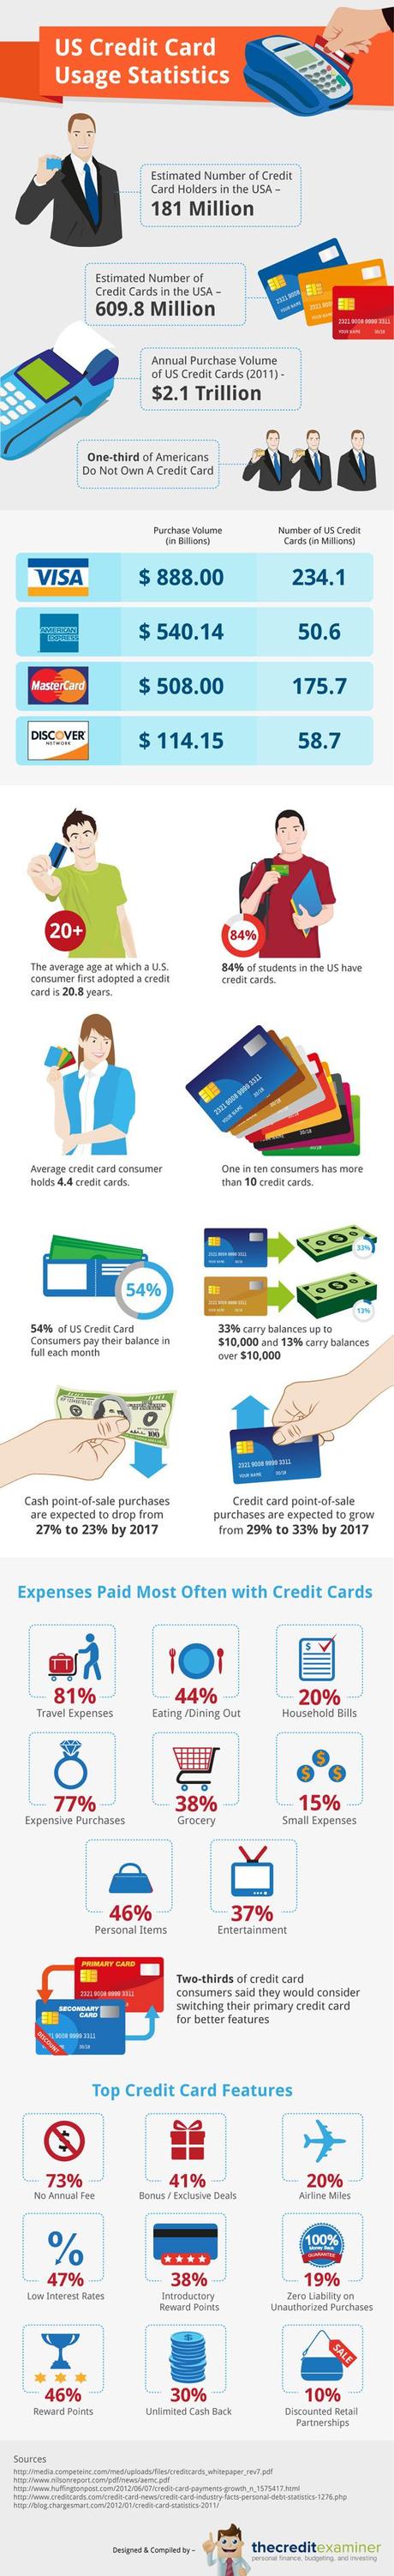 Statistics on Credit Card Usage in the United States